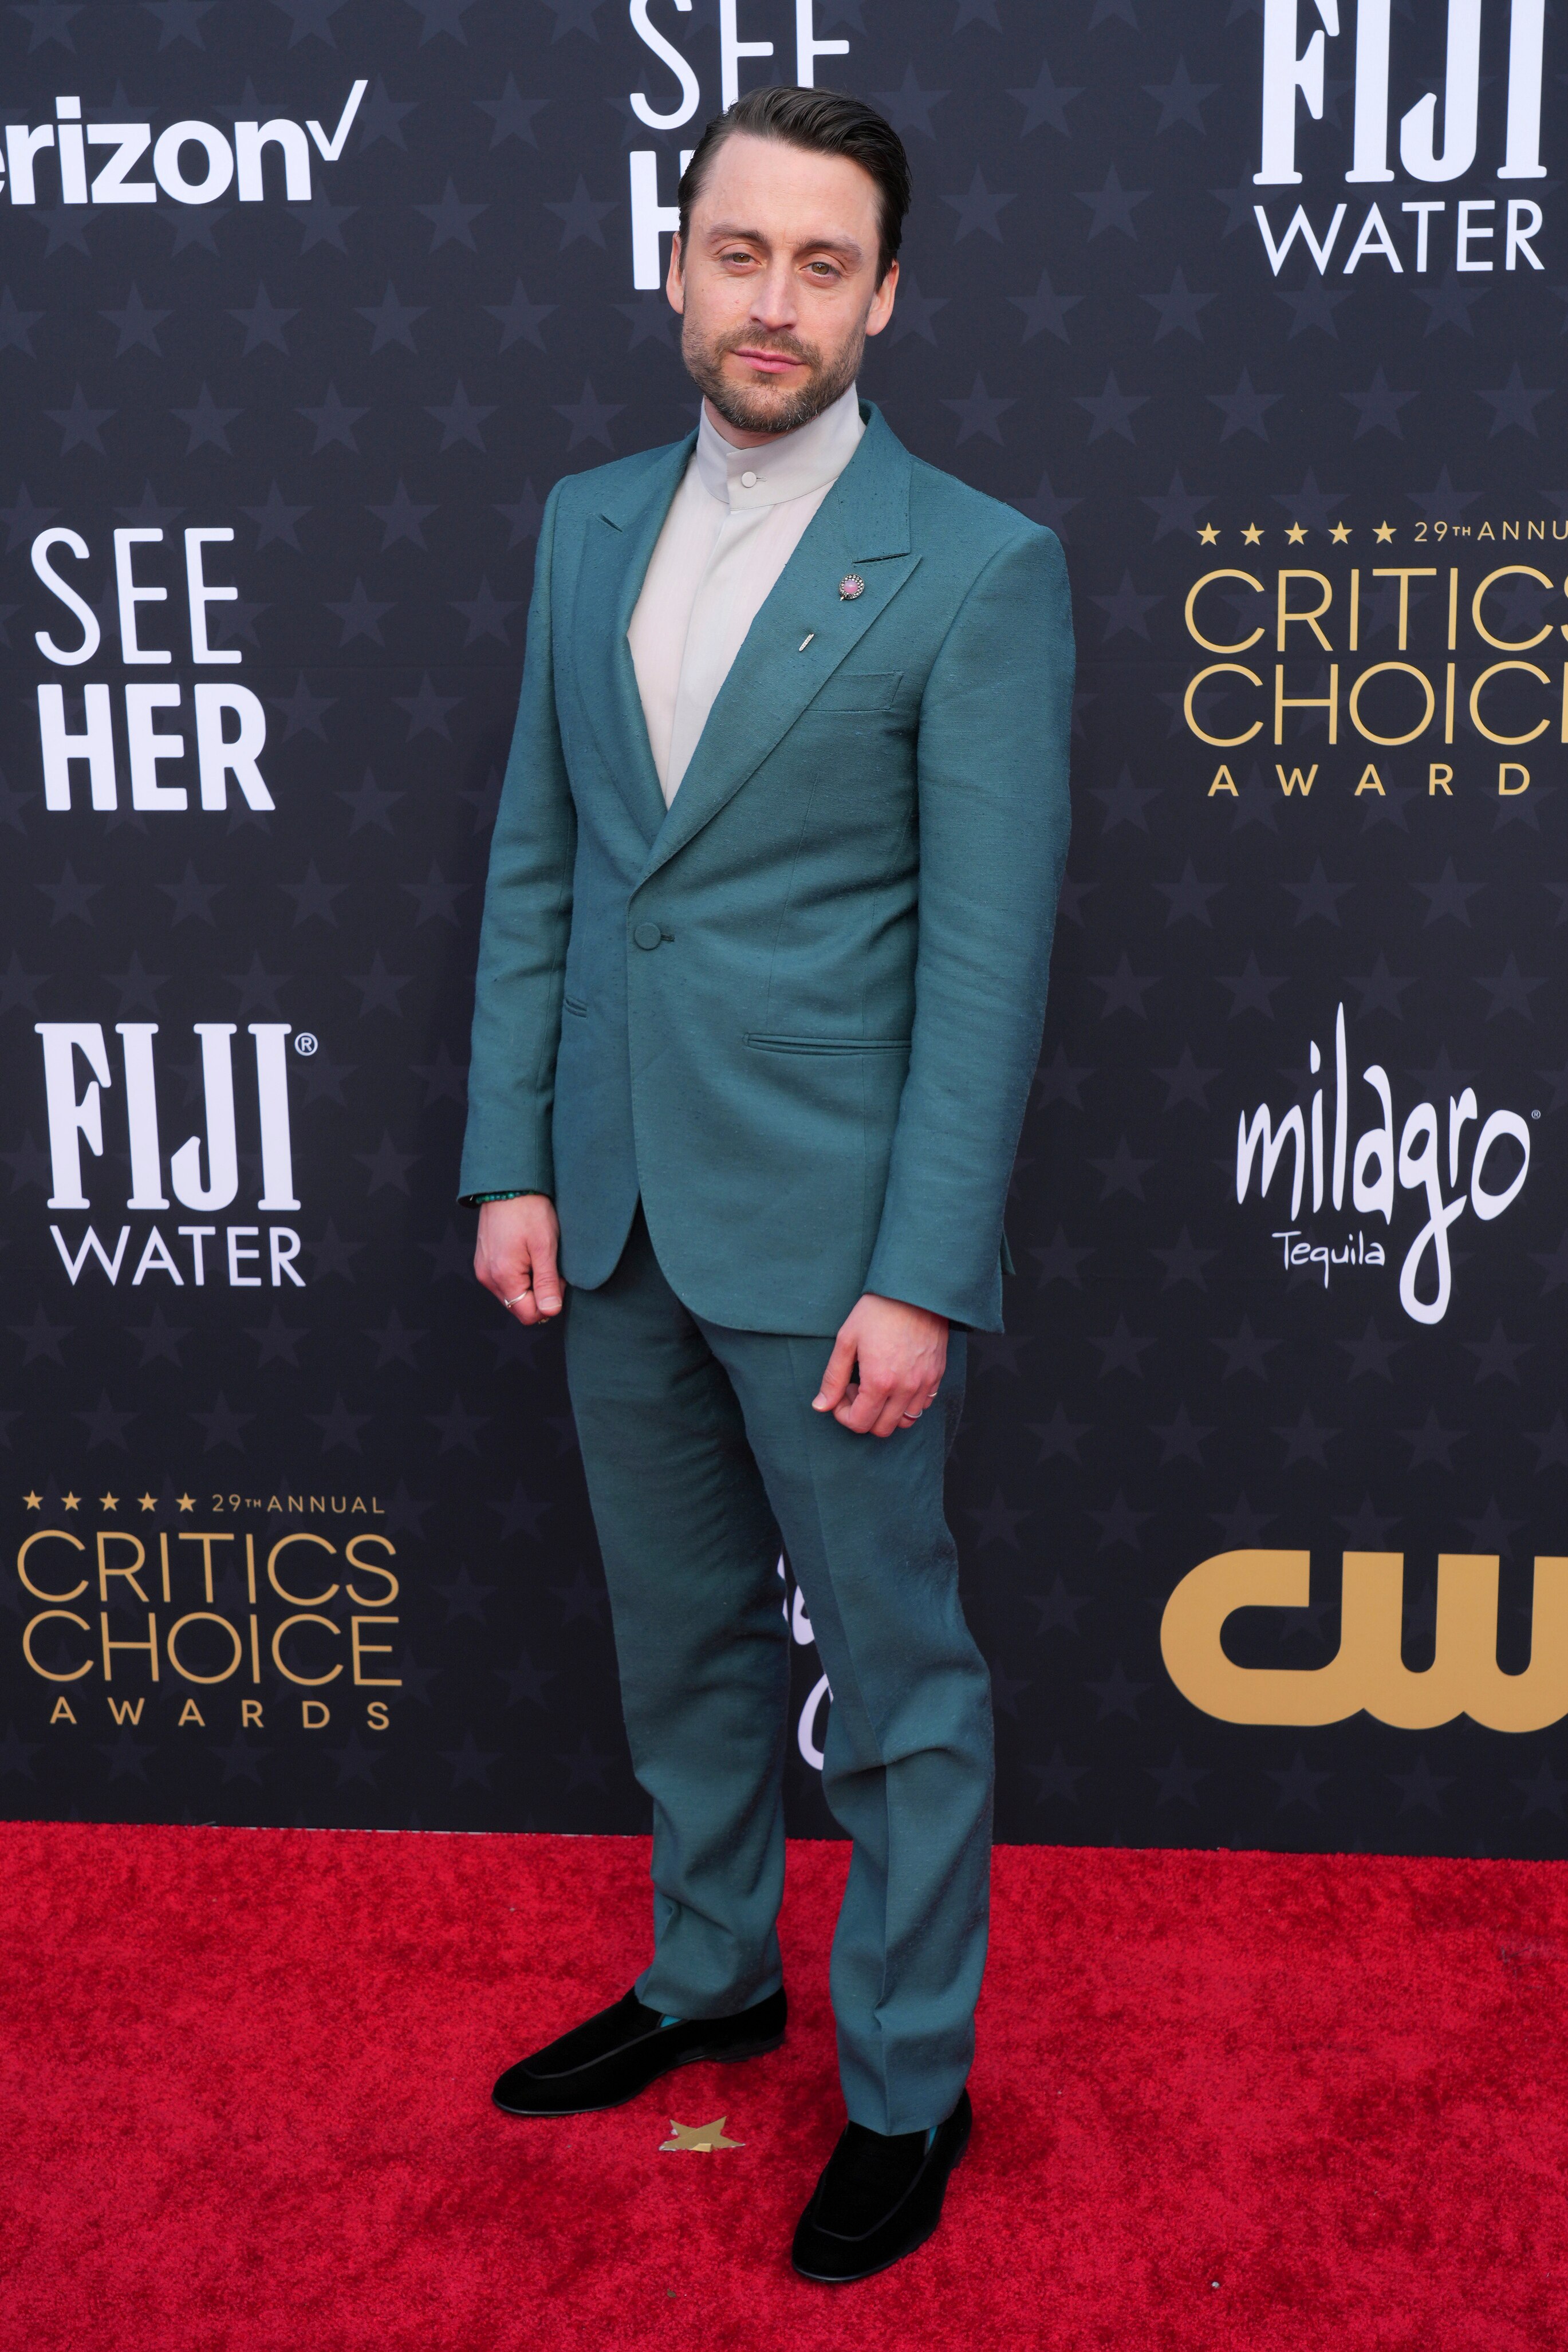 Kieran Culkin wearing a teal suit with a high-necked grey button-up shirt underneath